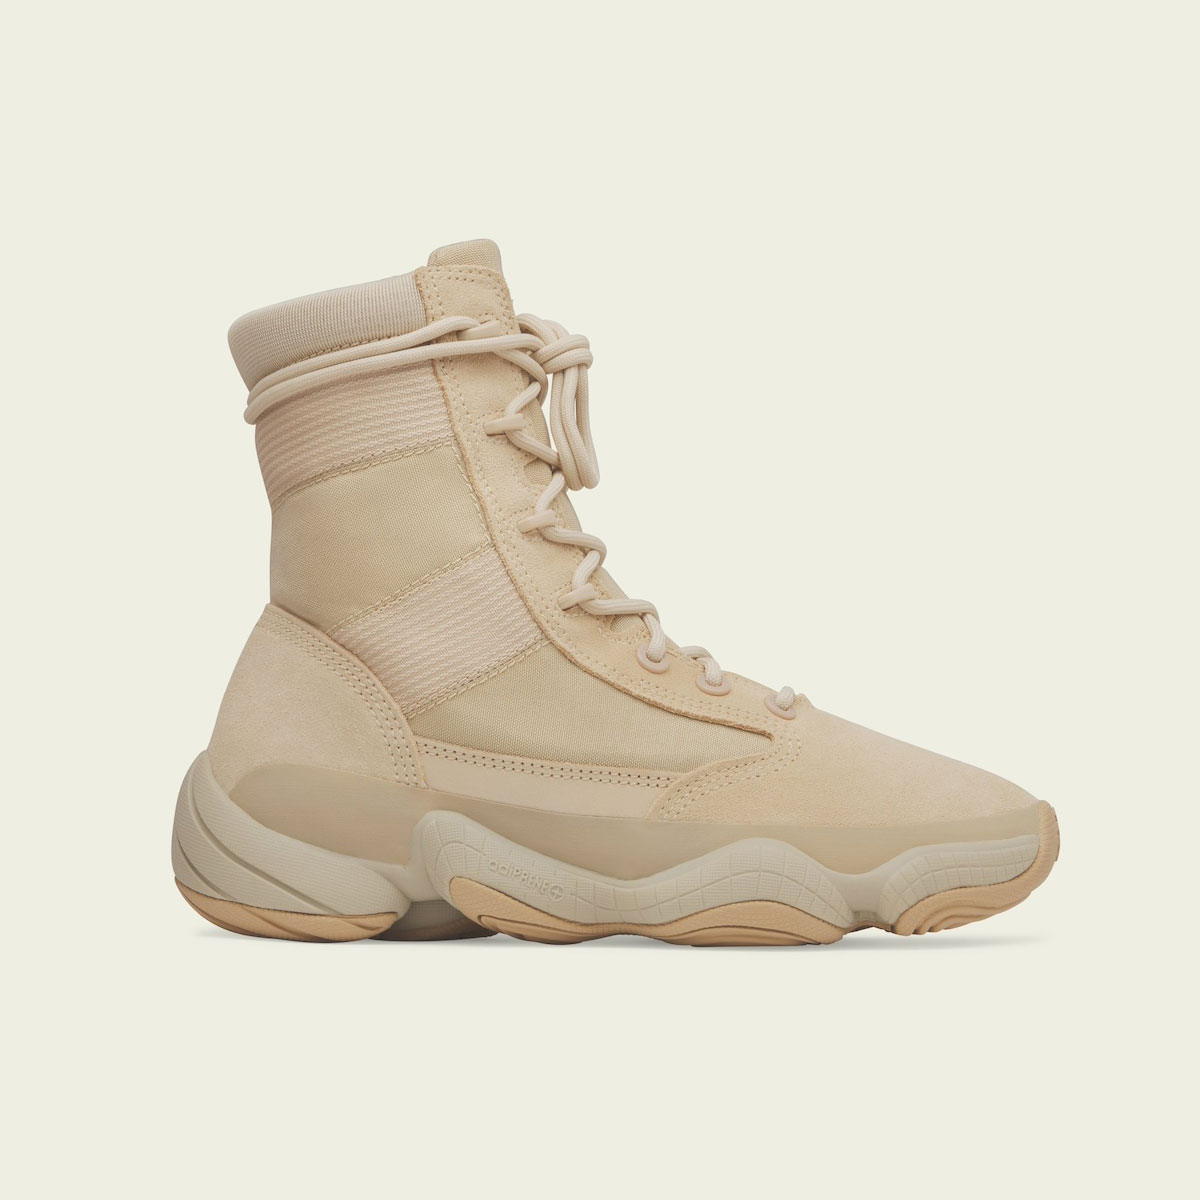 adidas Yeezy 500 High Tactical Boot “Sand” IF7549